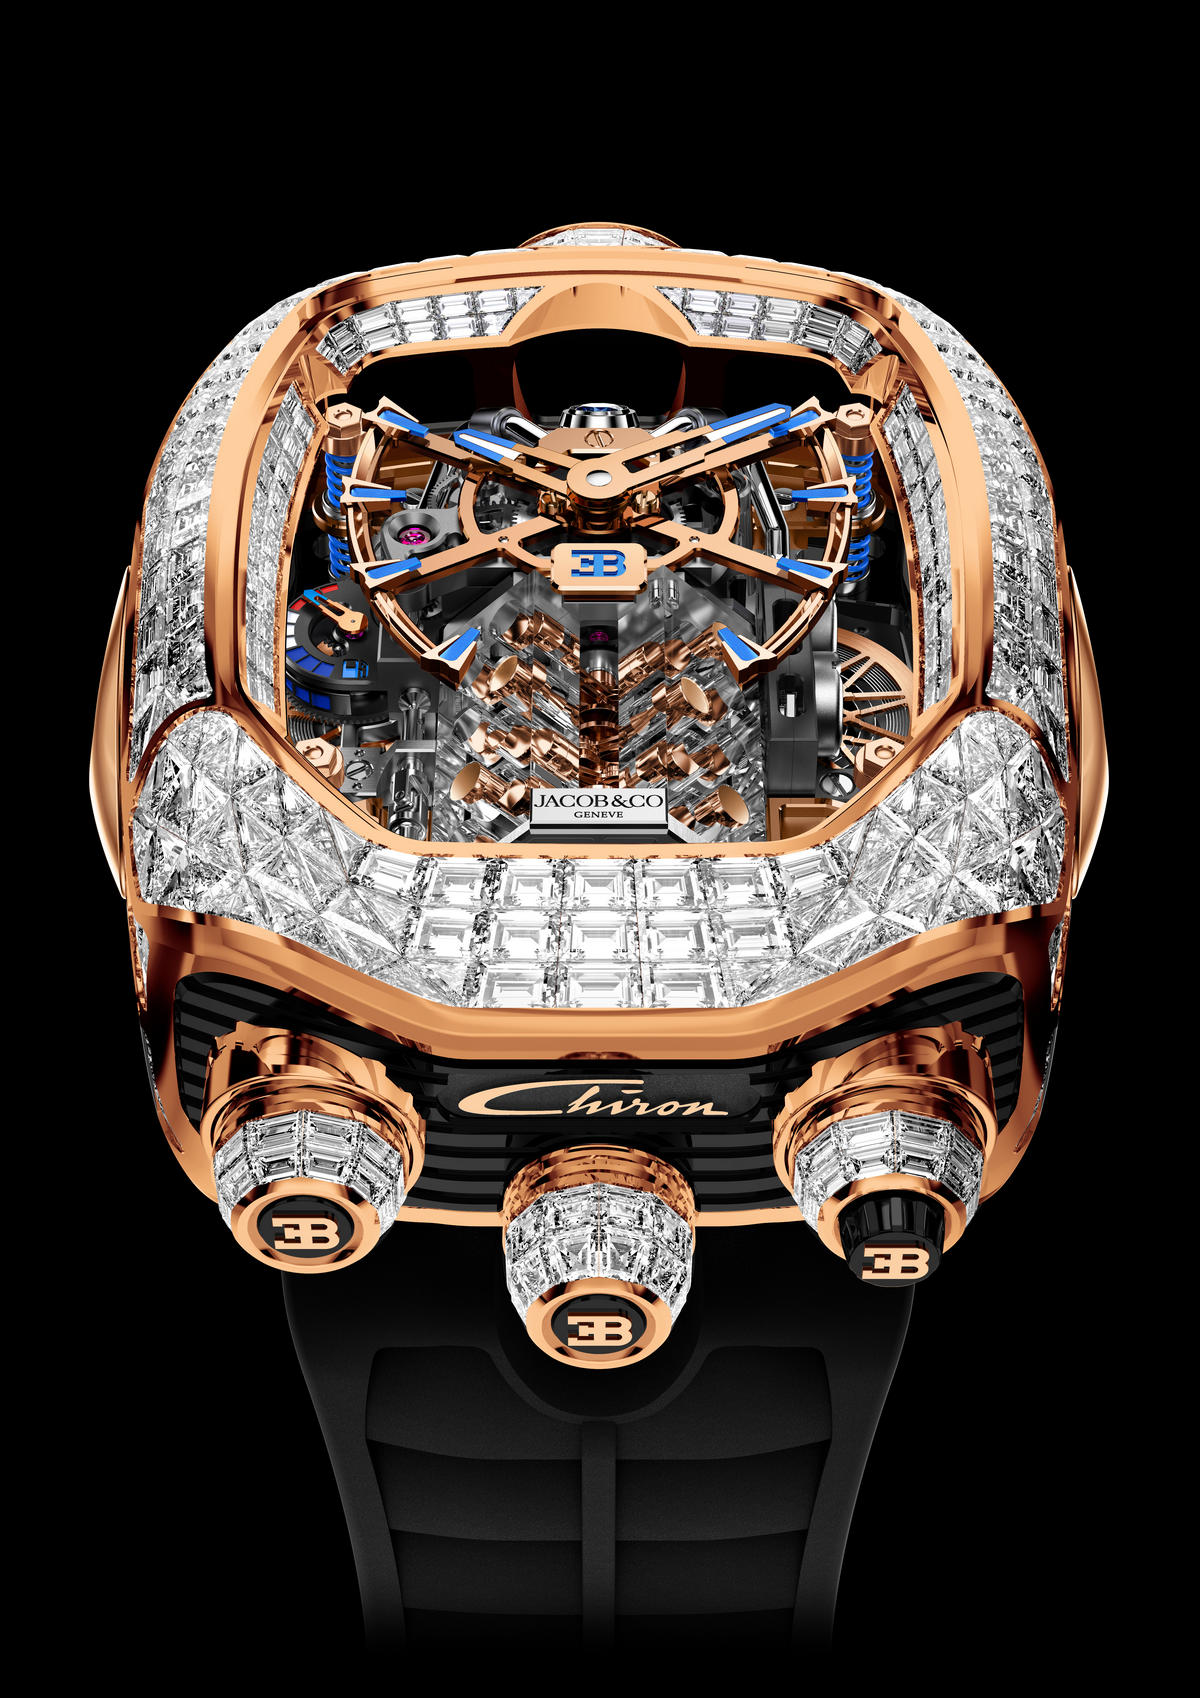 Jacob & Co. reveals four new iterations of the Bugatti Chiron Tourbillon watch with a tiny working W16 engine on the dial